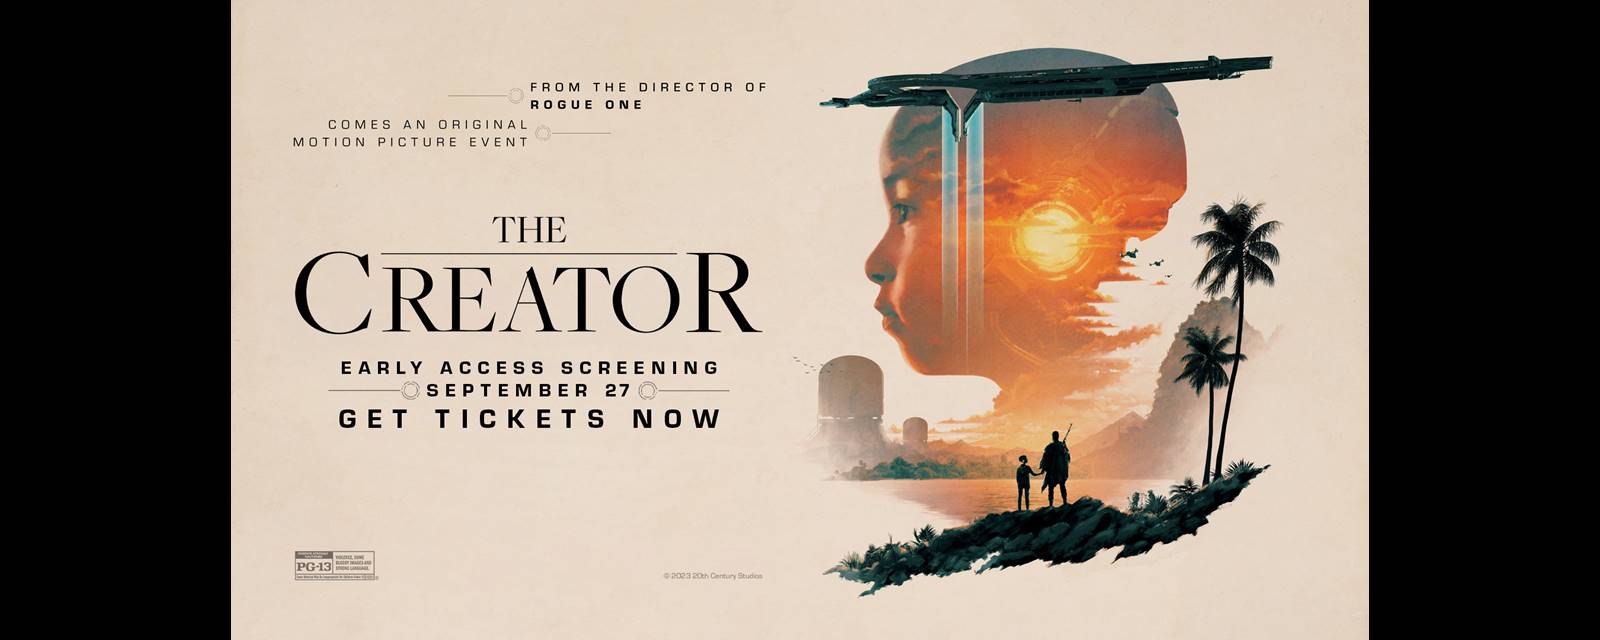 The Creator: Early Access